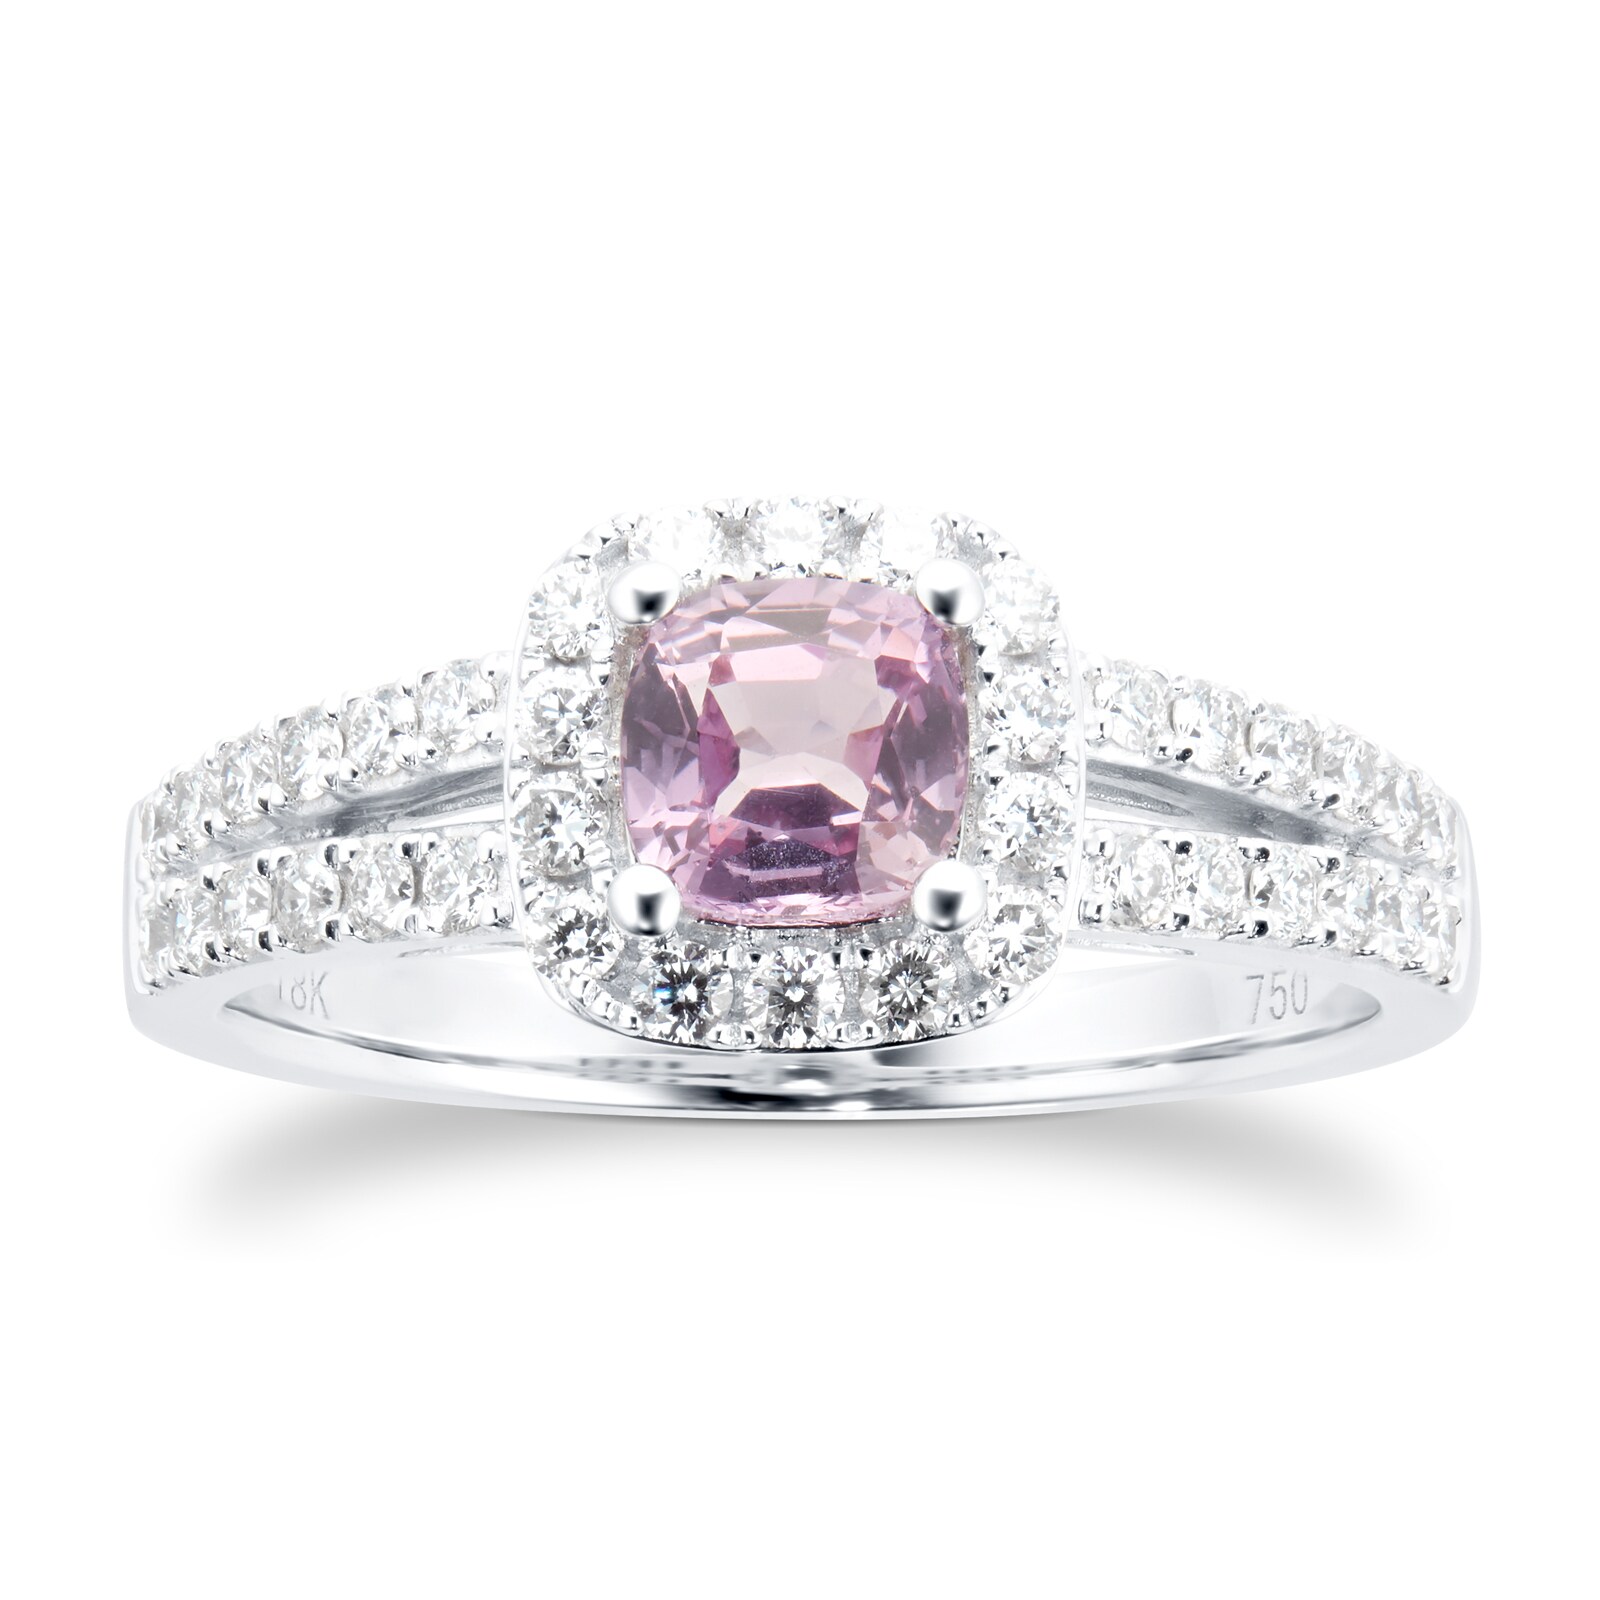 18ct White Gold Pink Sapphire & 0.43cttw Diamond Cushion Cut Halo Ring - Ring Size M